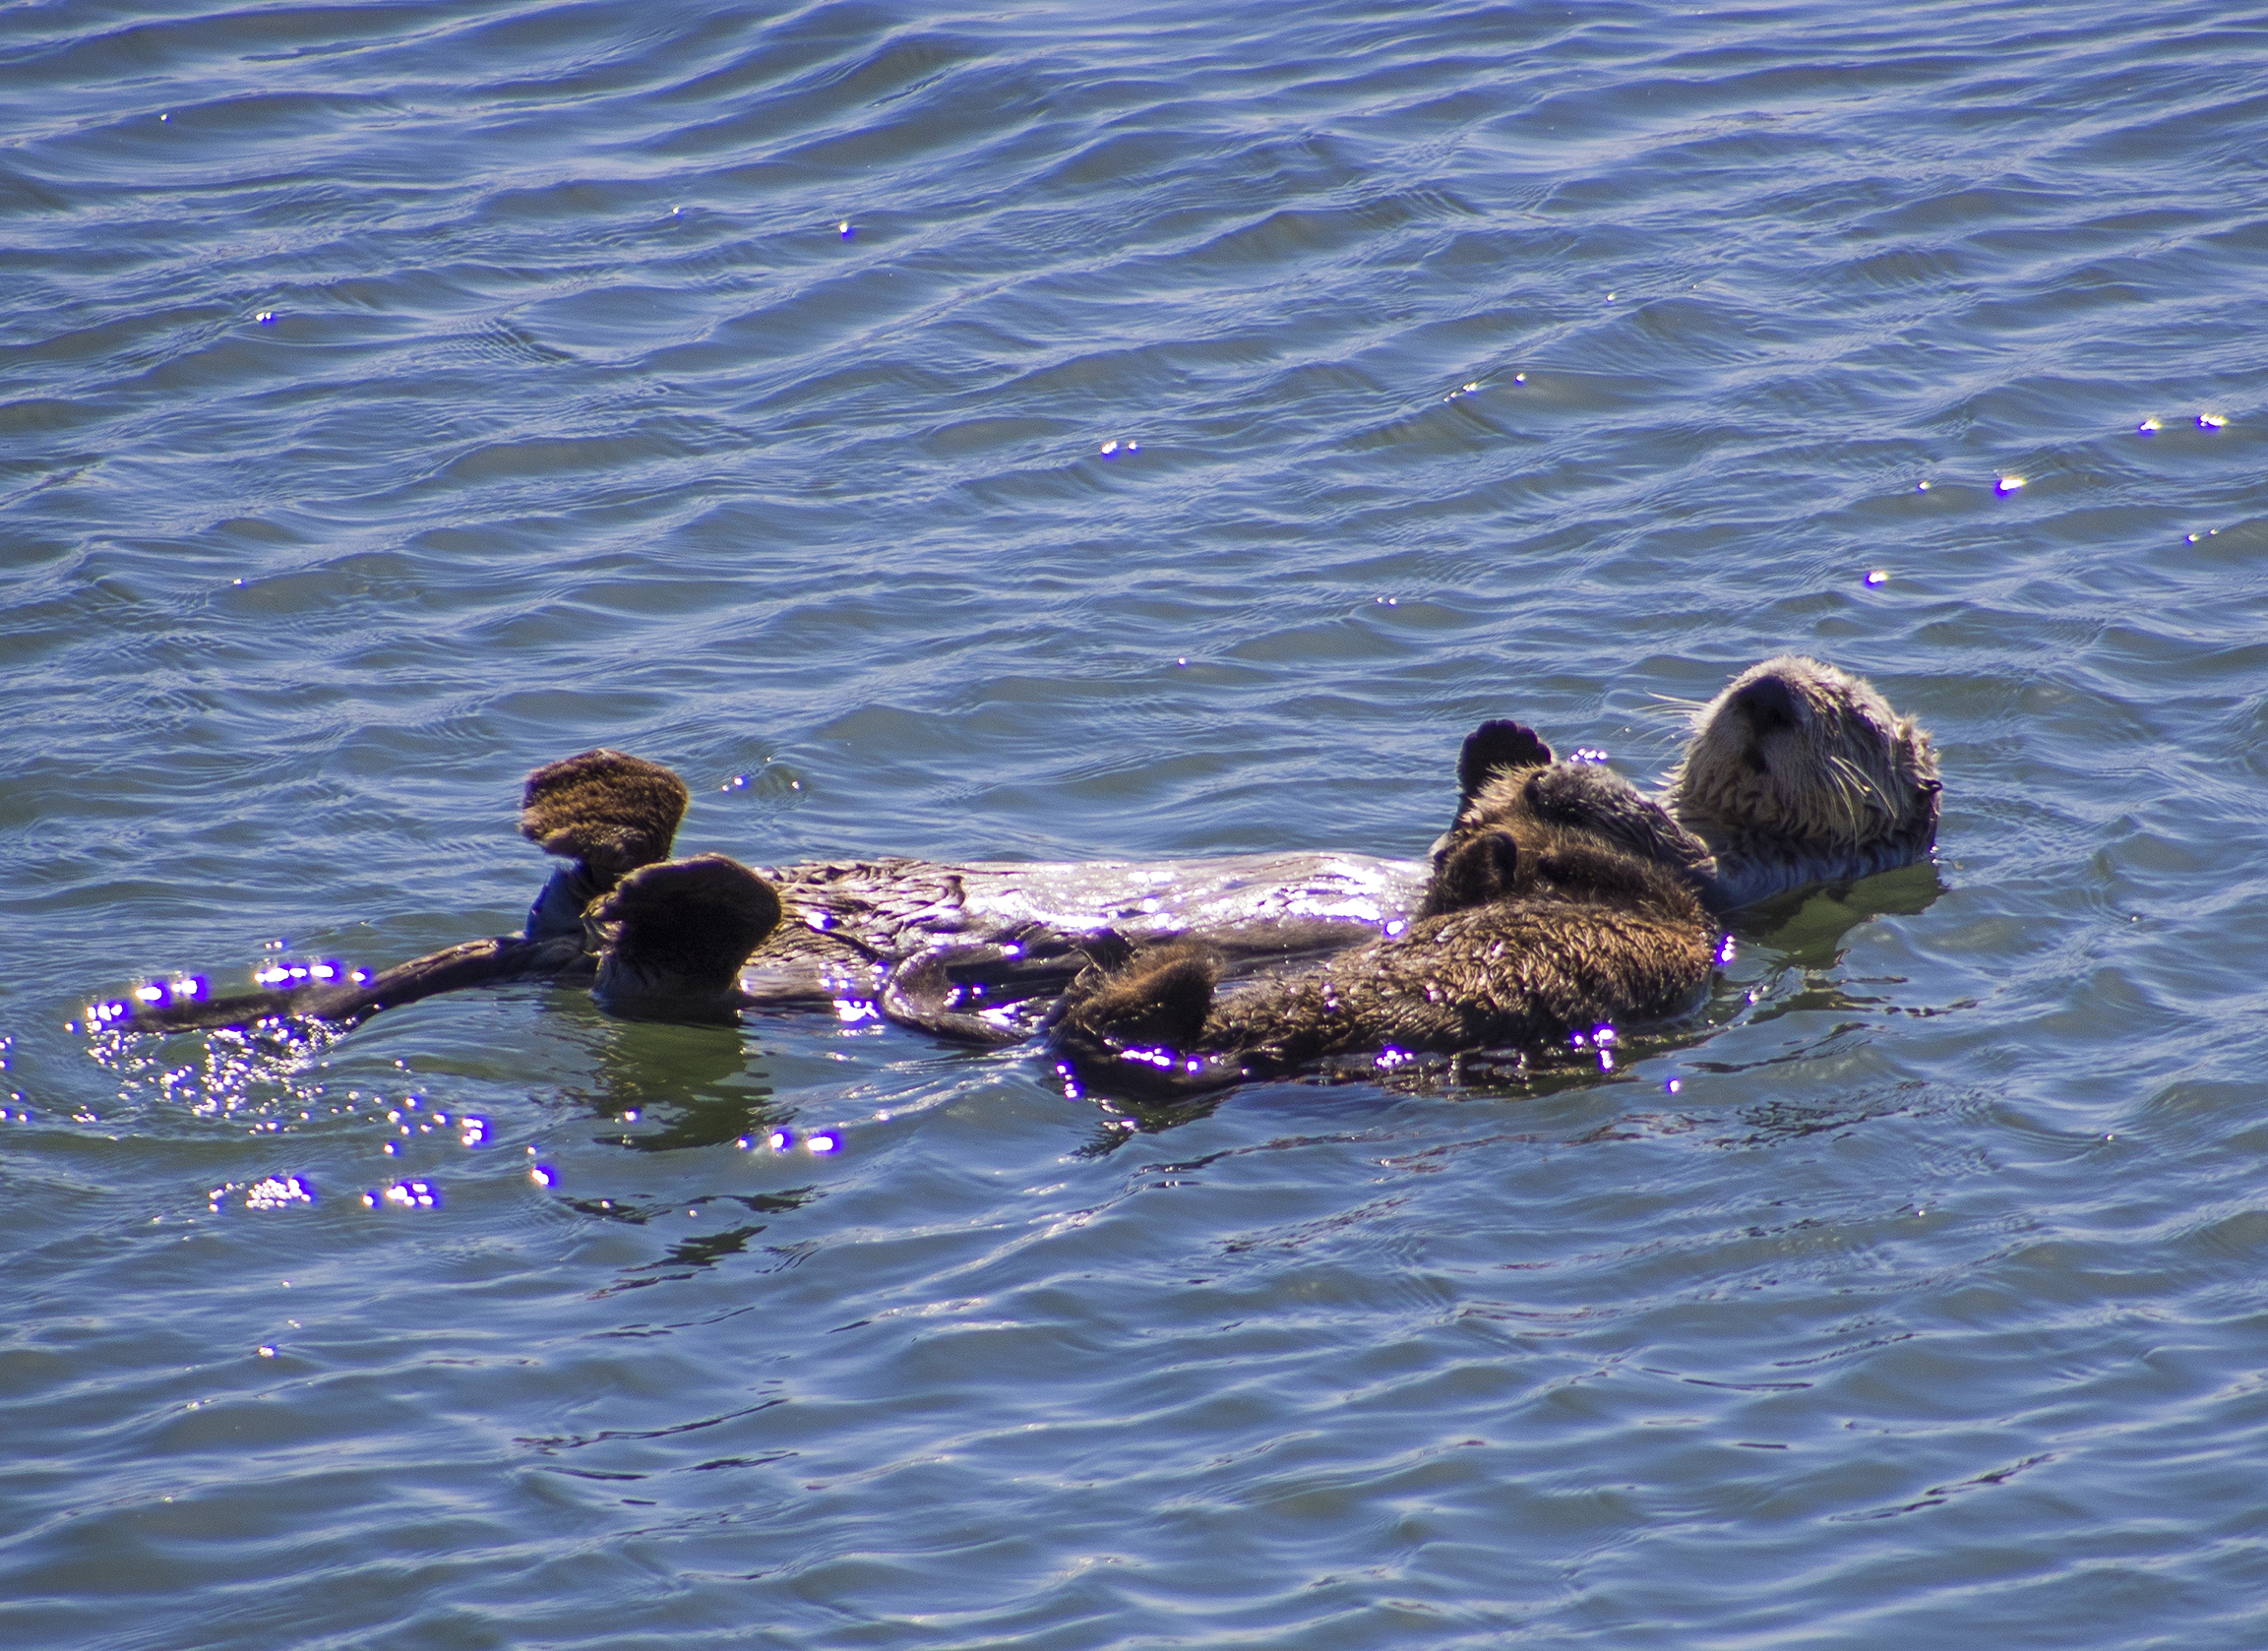 Sea Otter Mum and Pup Float Together Peacefully